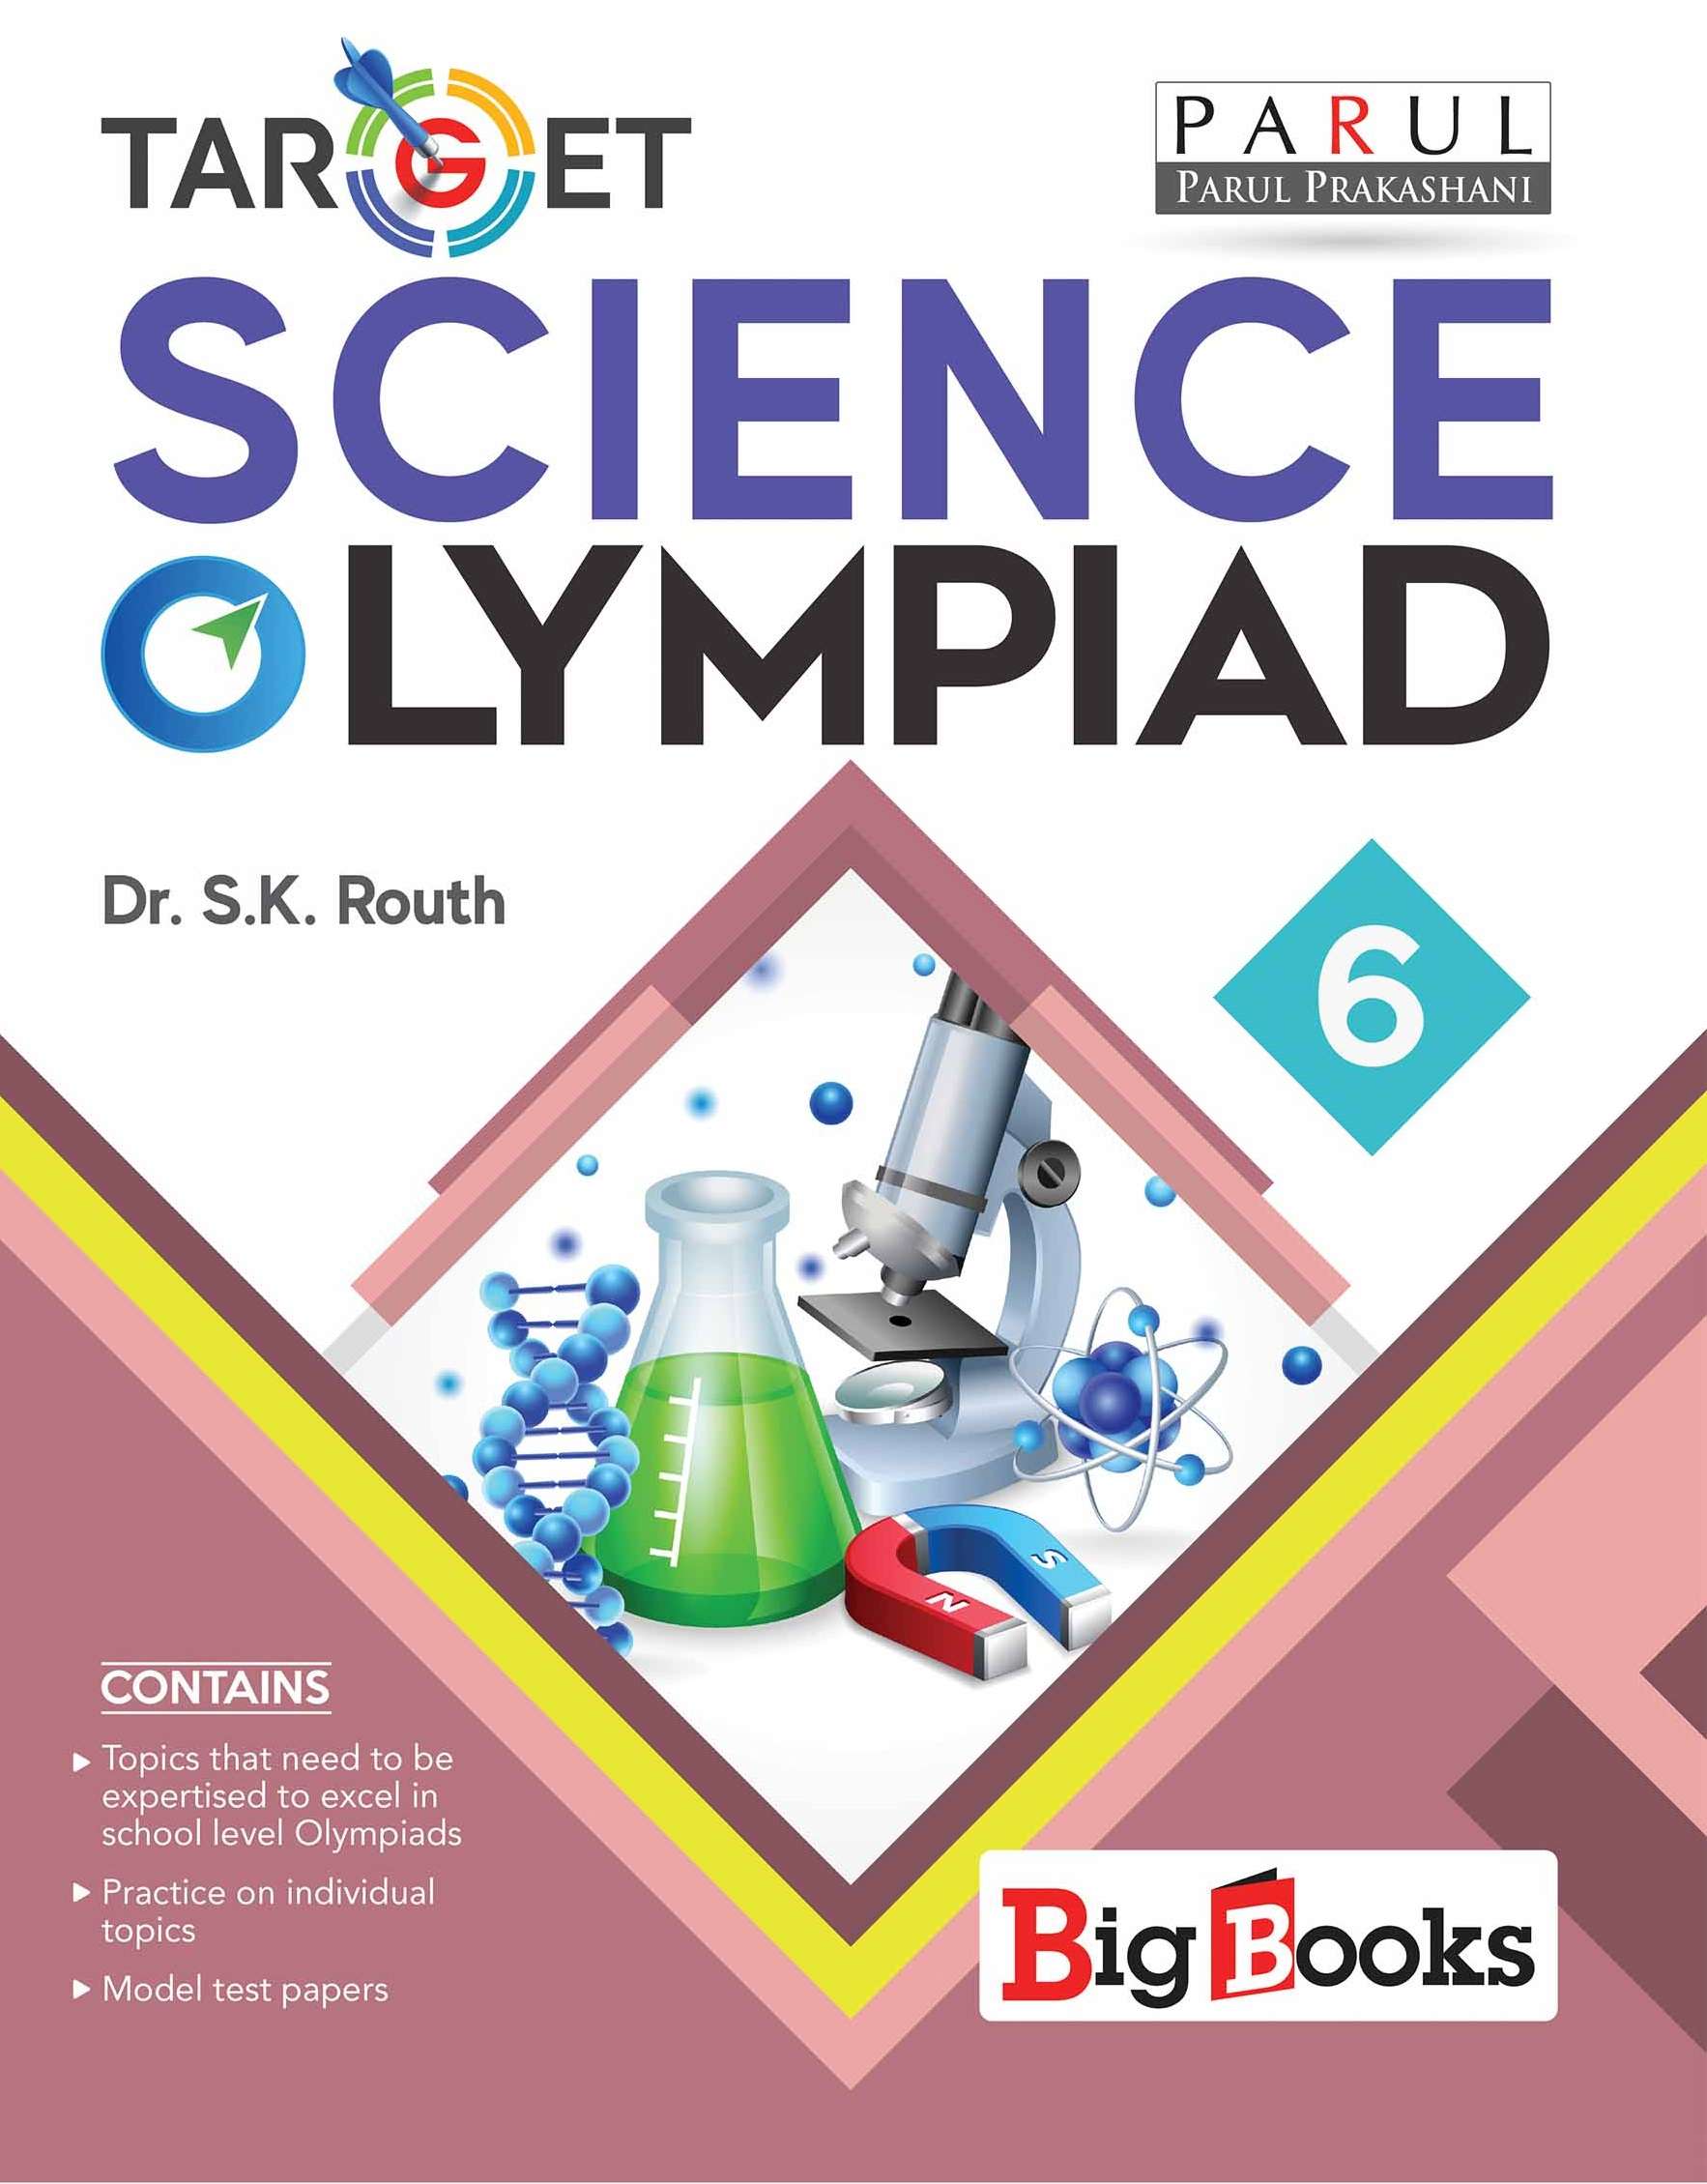 Buy Science Olympiad book for 6